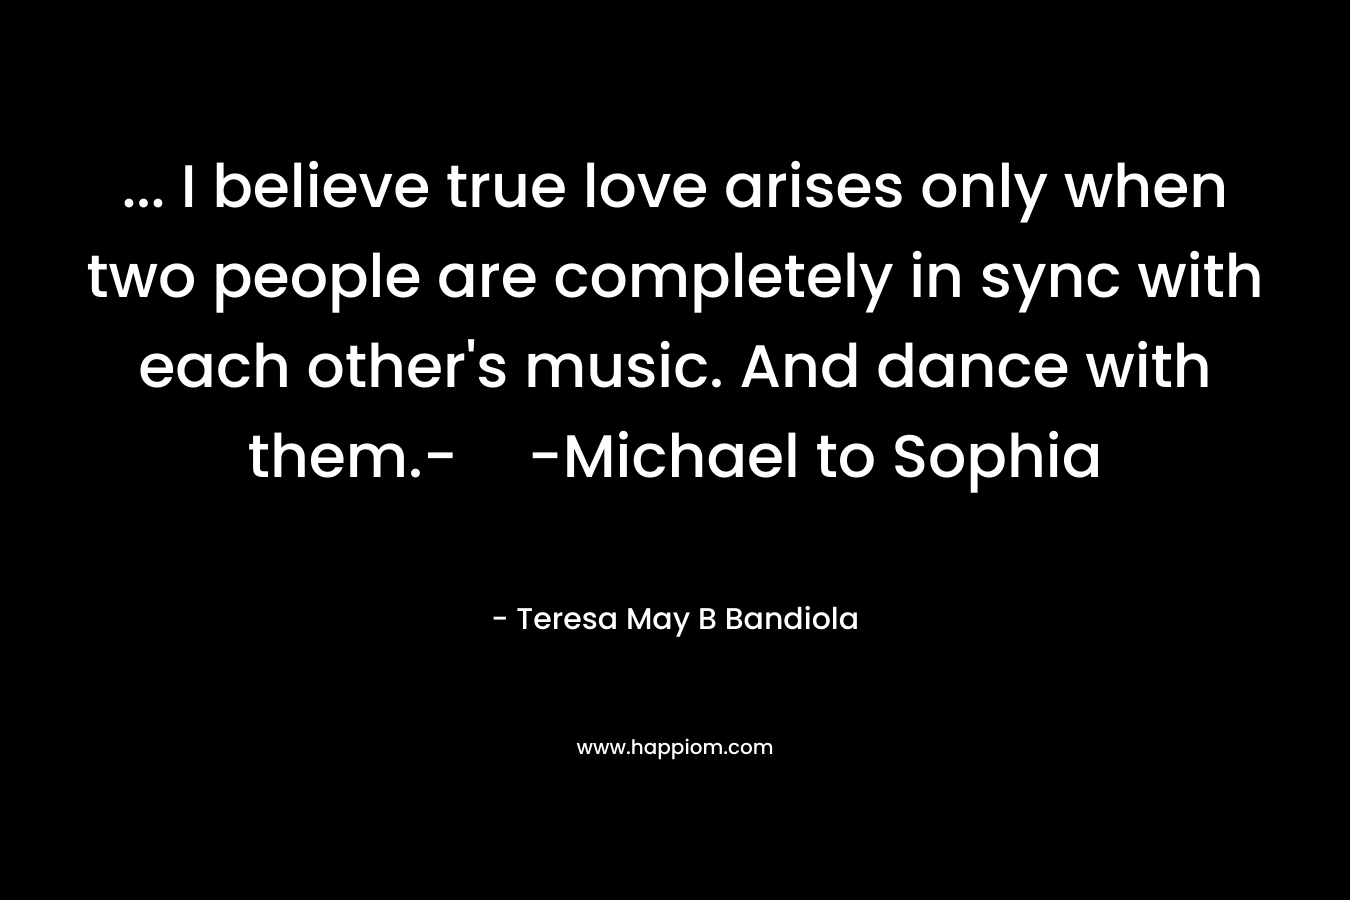 … I believe true love arises only when two people are completely in sync with each other’s music. And dance with them.--Michael to Sophia – Teresa May B Bandiola